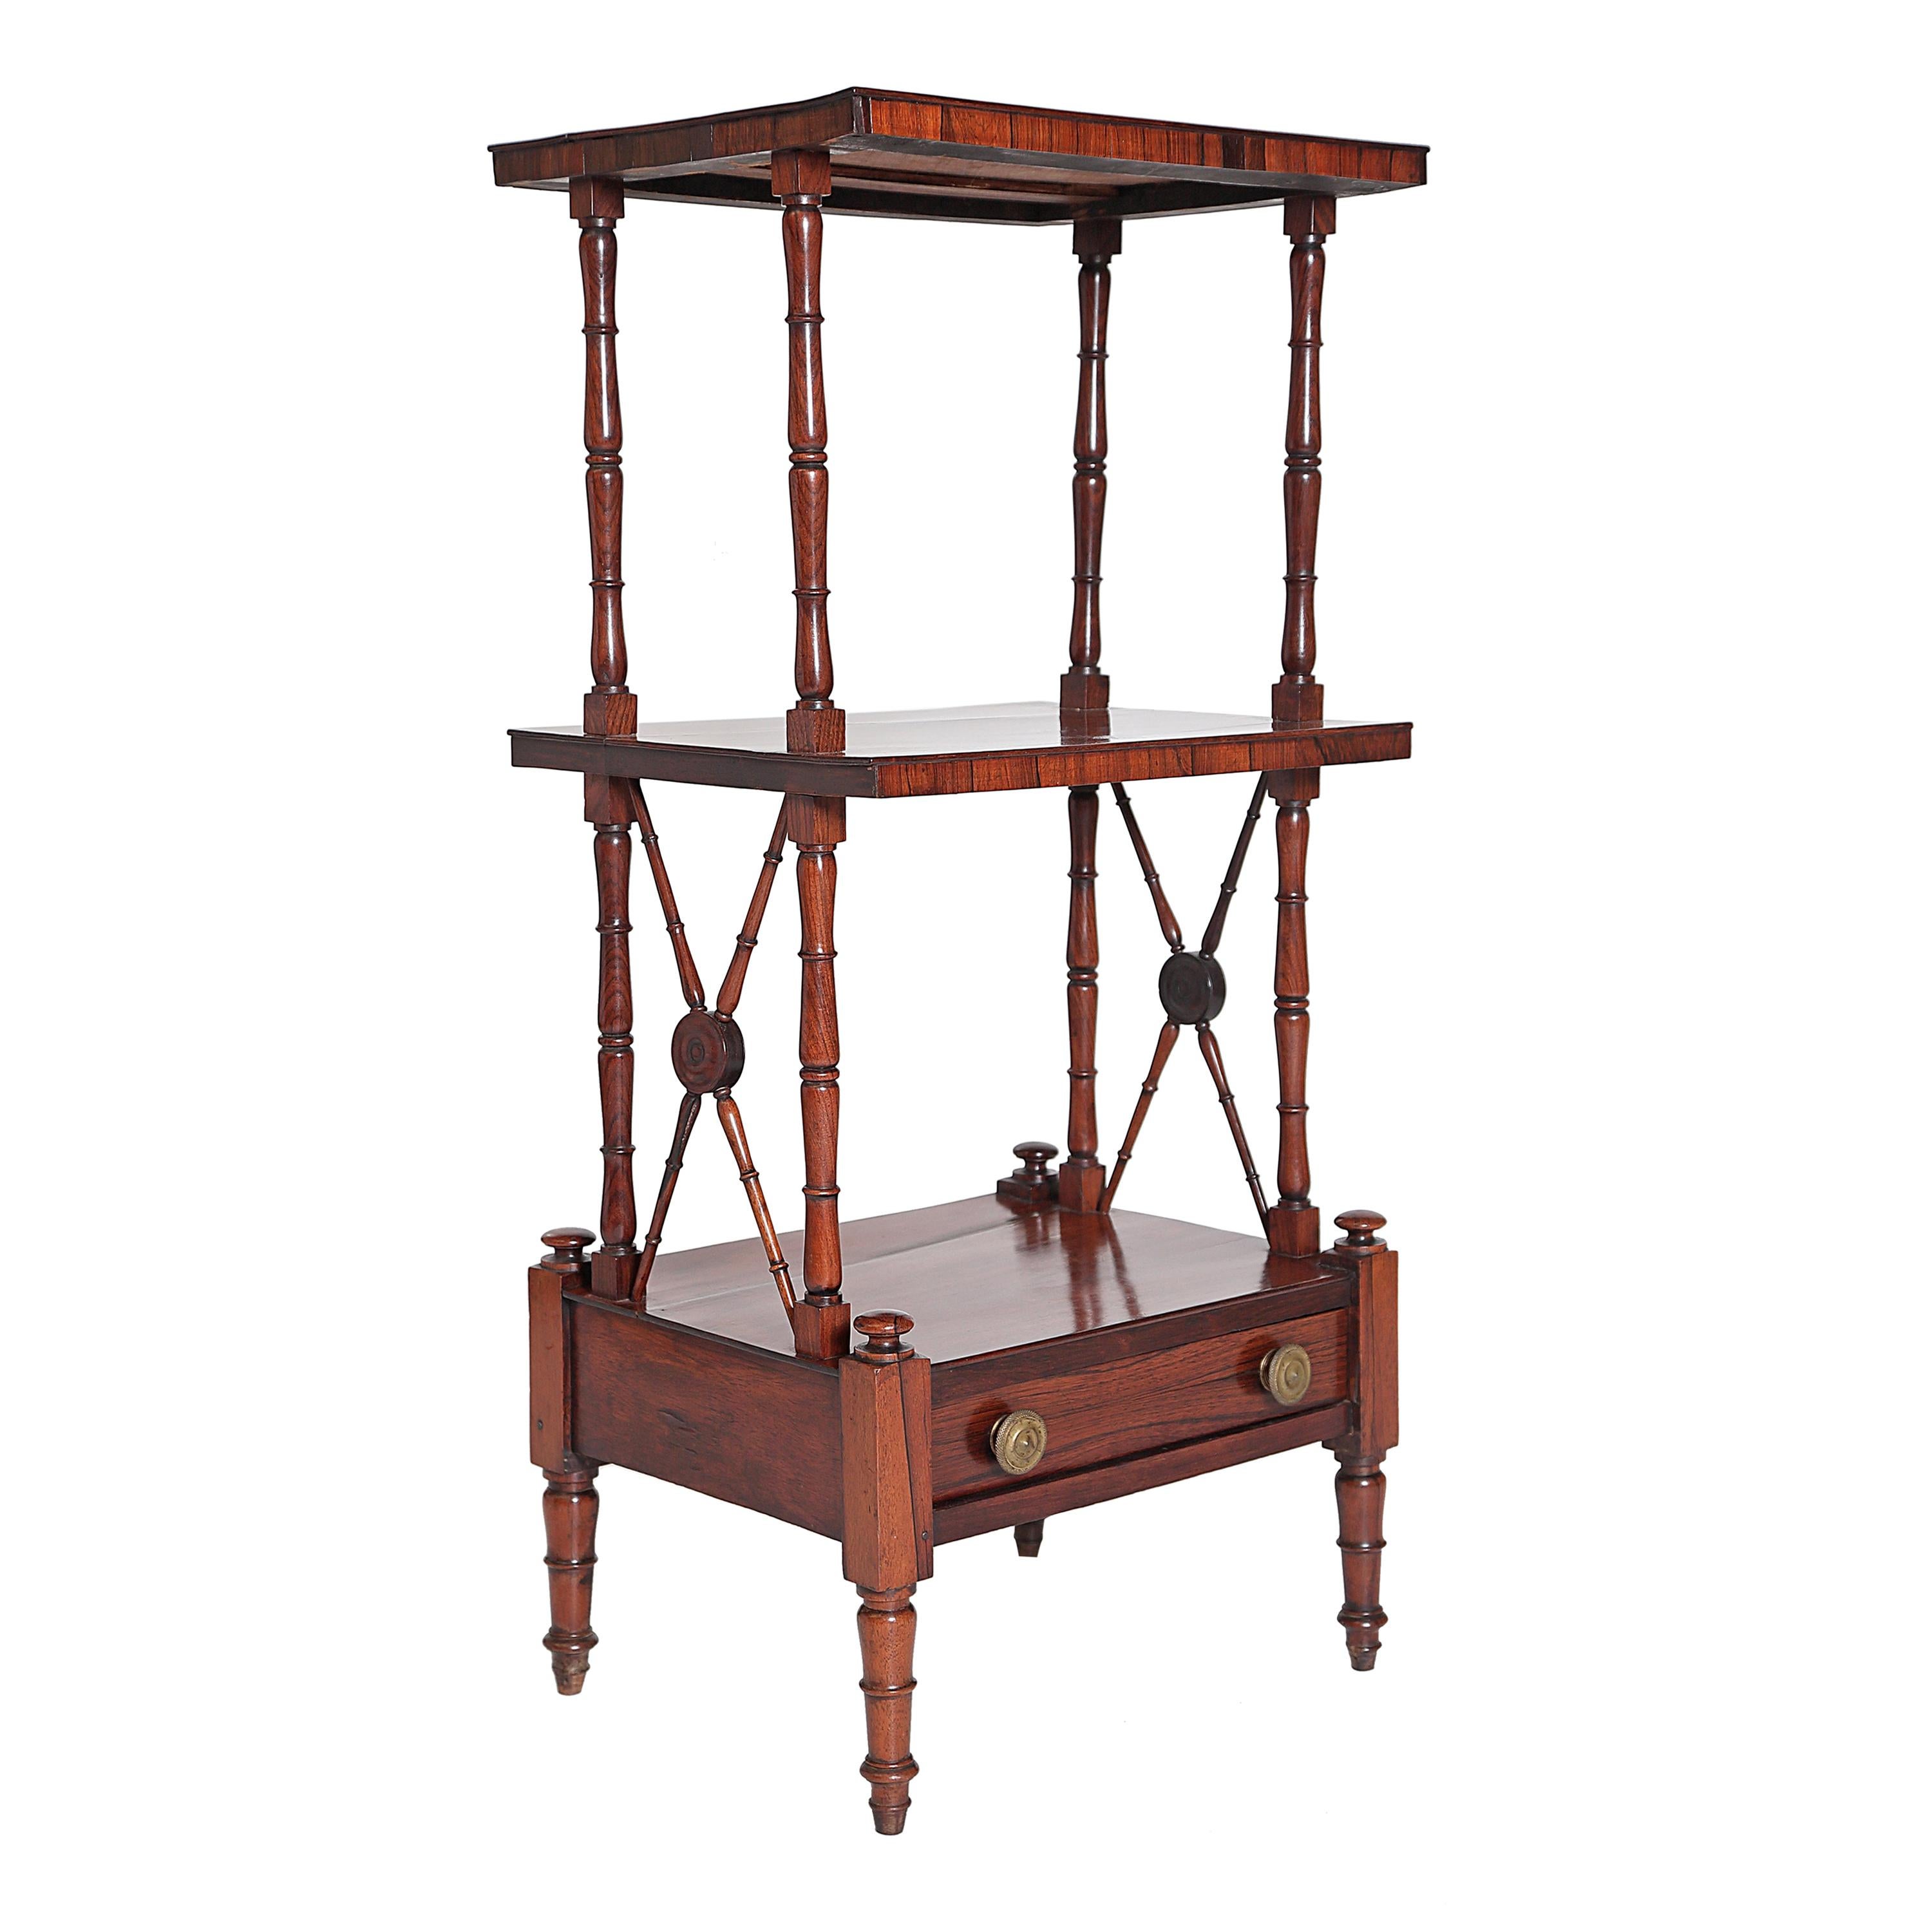 An English Regency Rosewood 3-Tiered Whatnot